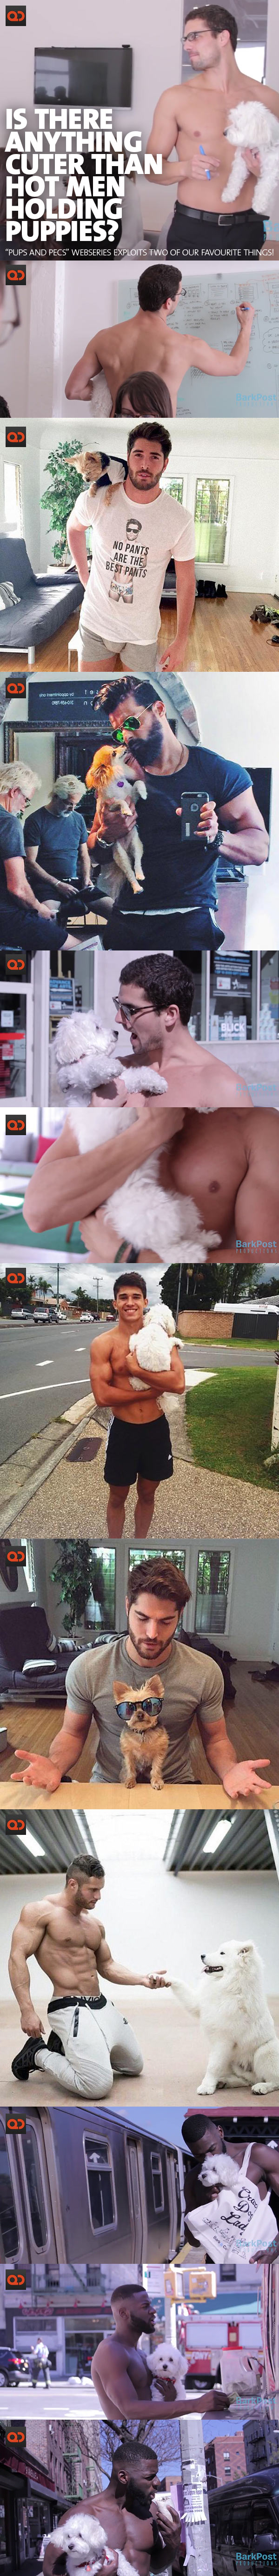 Is There Anything Cutter Than Hot Men Holding Puppies?  “Pups and Pecs” WebSeries Exploits Two Of Our Favourite things!